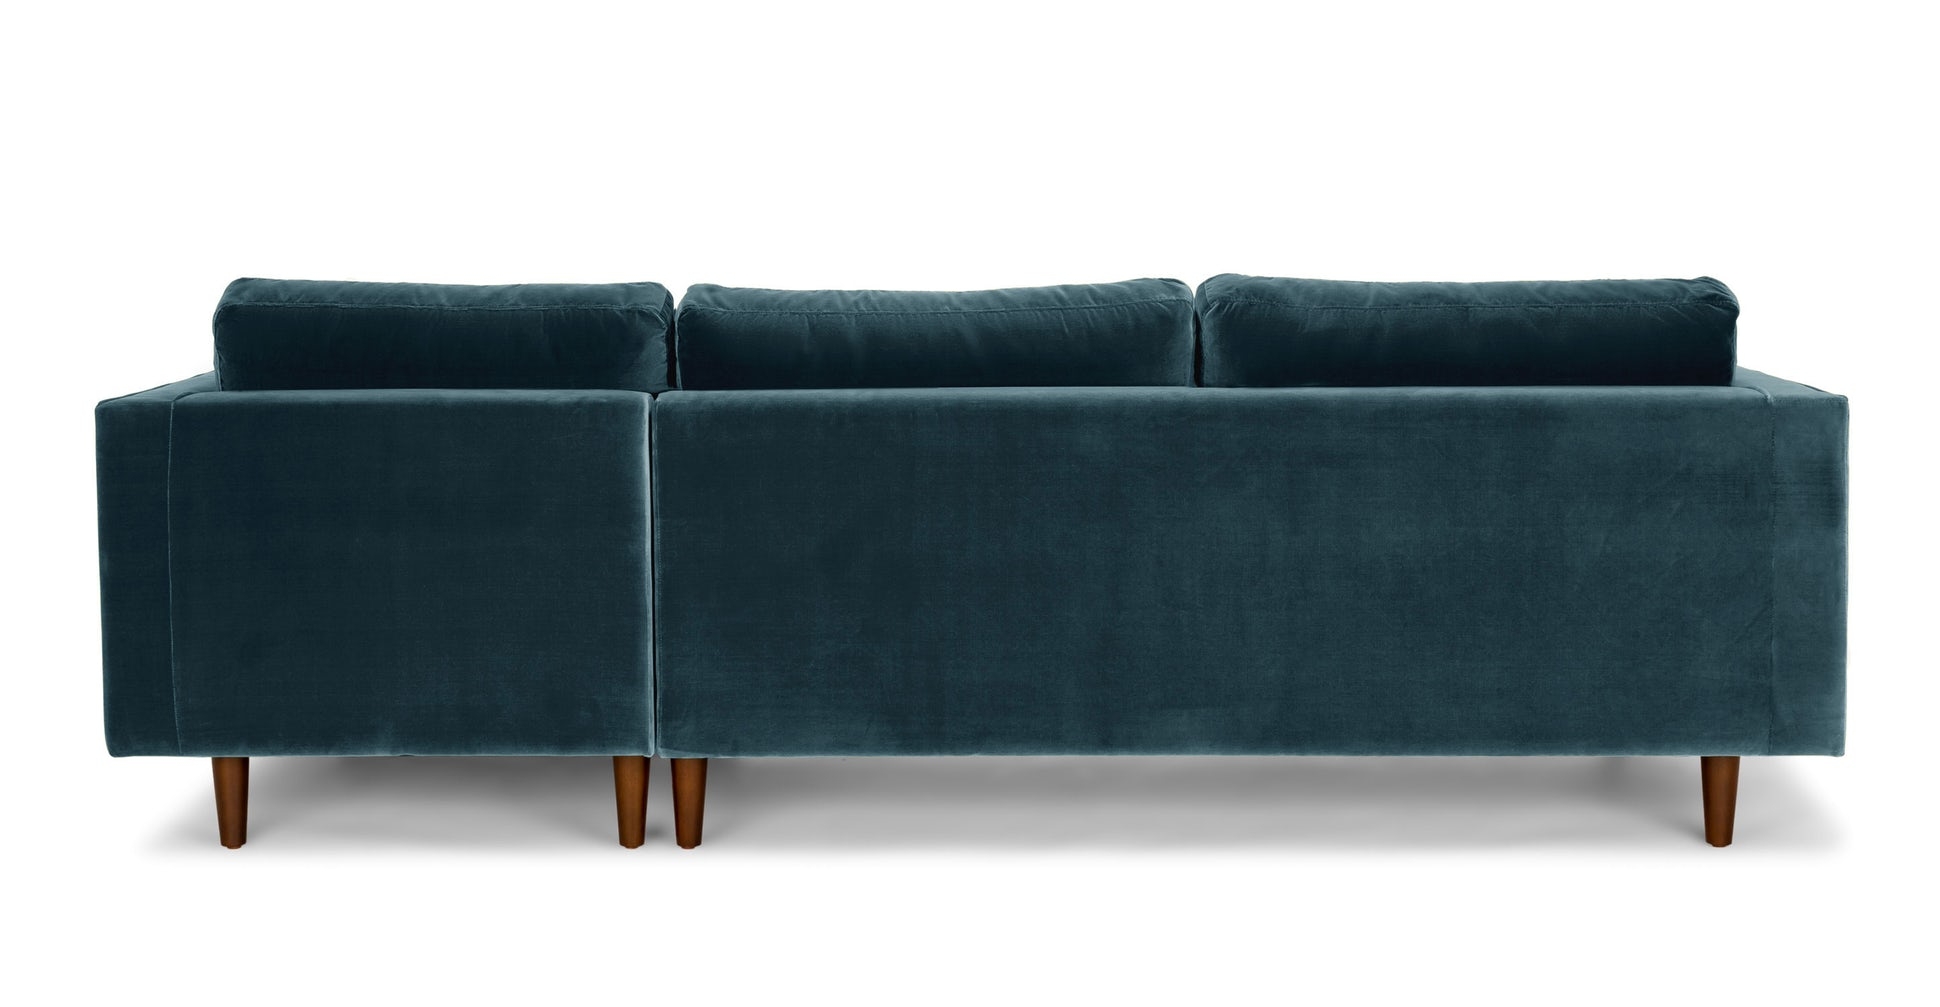 Sven Right Sectional Sofa, Pacific Blue - Image 2